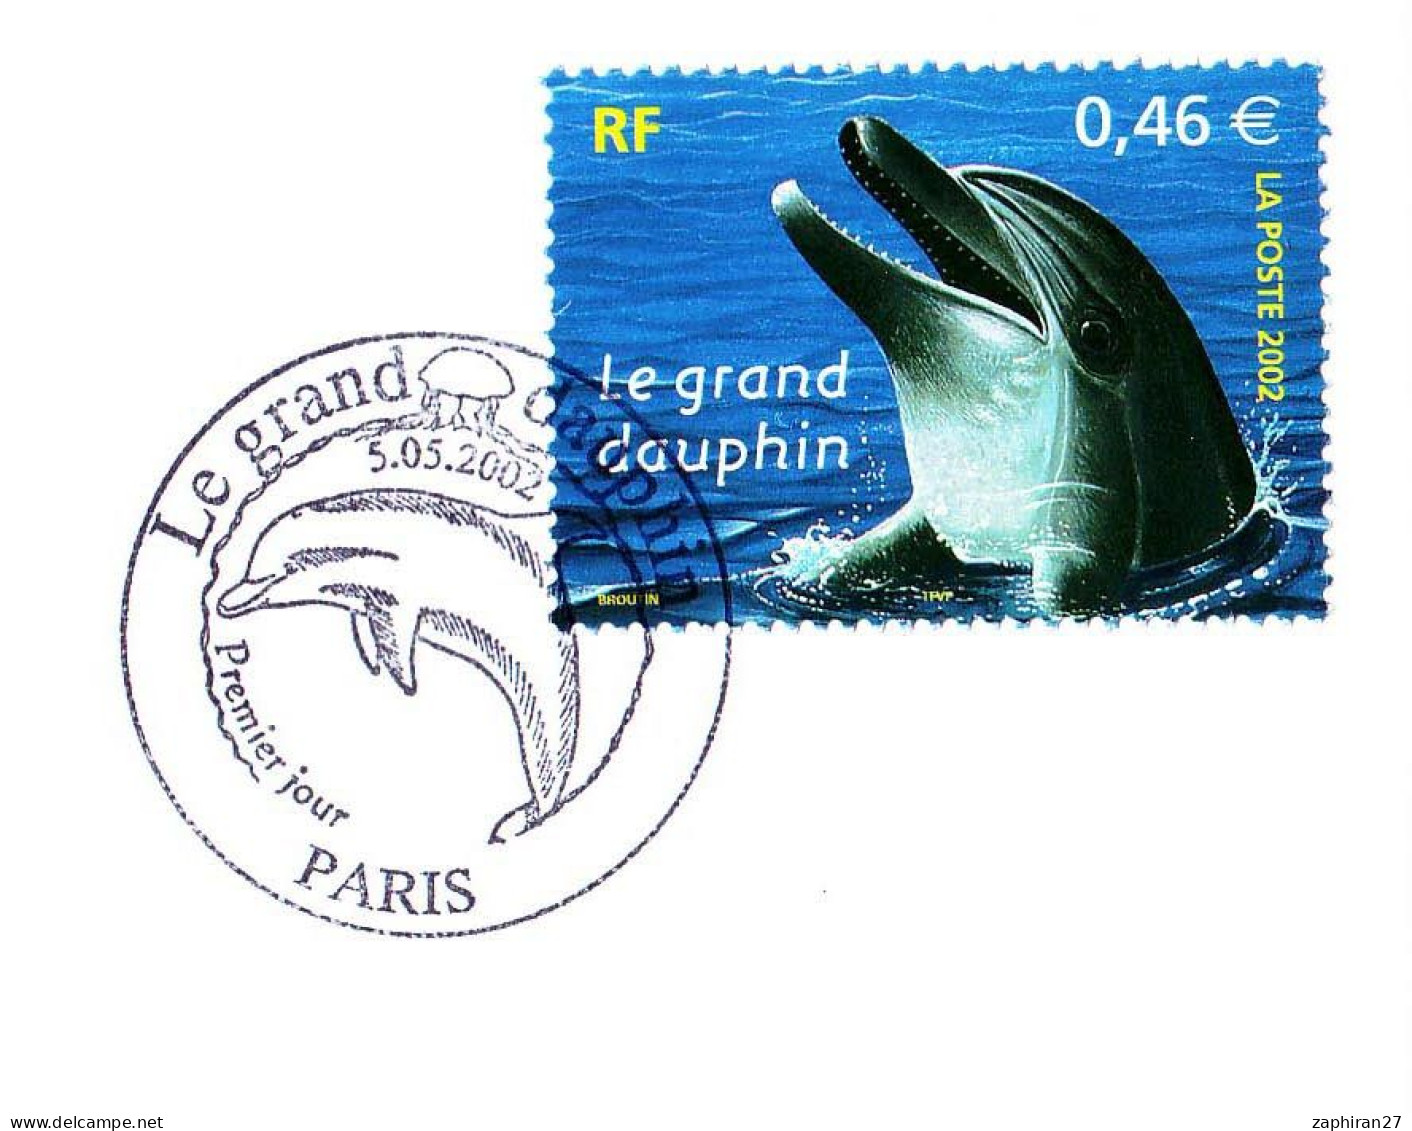 CAT MAMMIFERES MARINS : LE GRAND DAUPHIN  (5-5-2002)  #545# - Dolphins